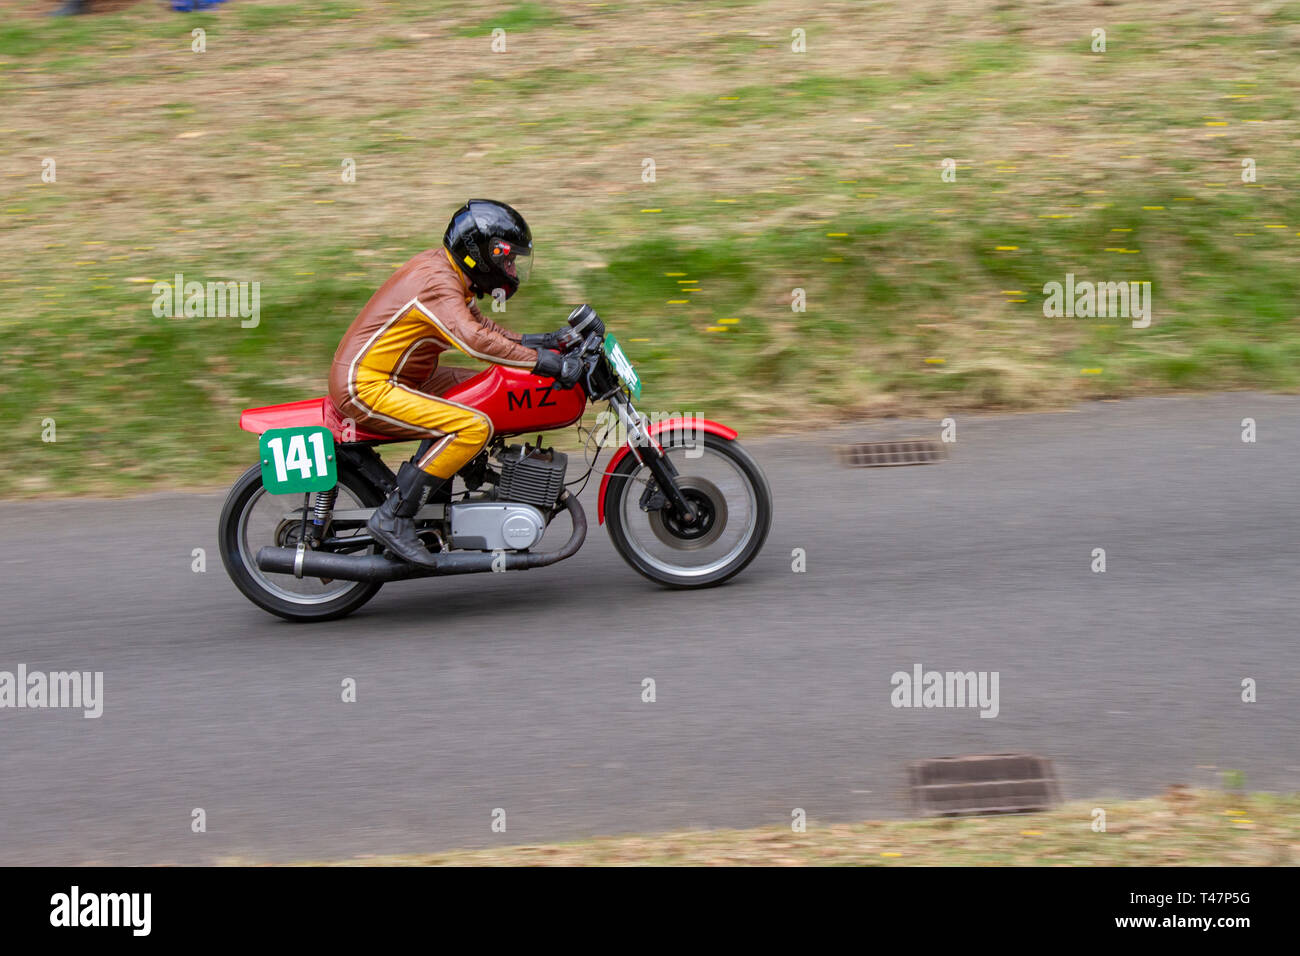 Chorley, Lancashire, UK. April, 2019. Hoghton Tower 43rd Motorcycle Sprint. Rider 141 Malcom Cookson from Barrow-in-Furness riding a 1972 25occ MZ vintage classic motorbike. Stock Photo